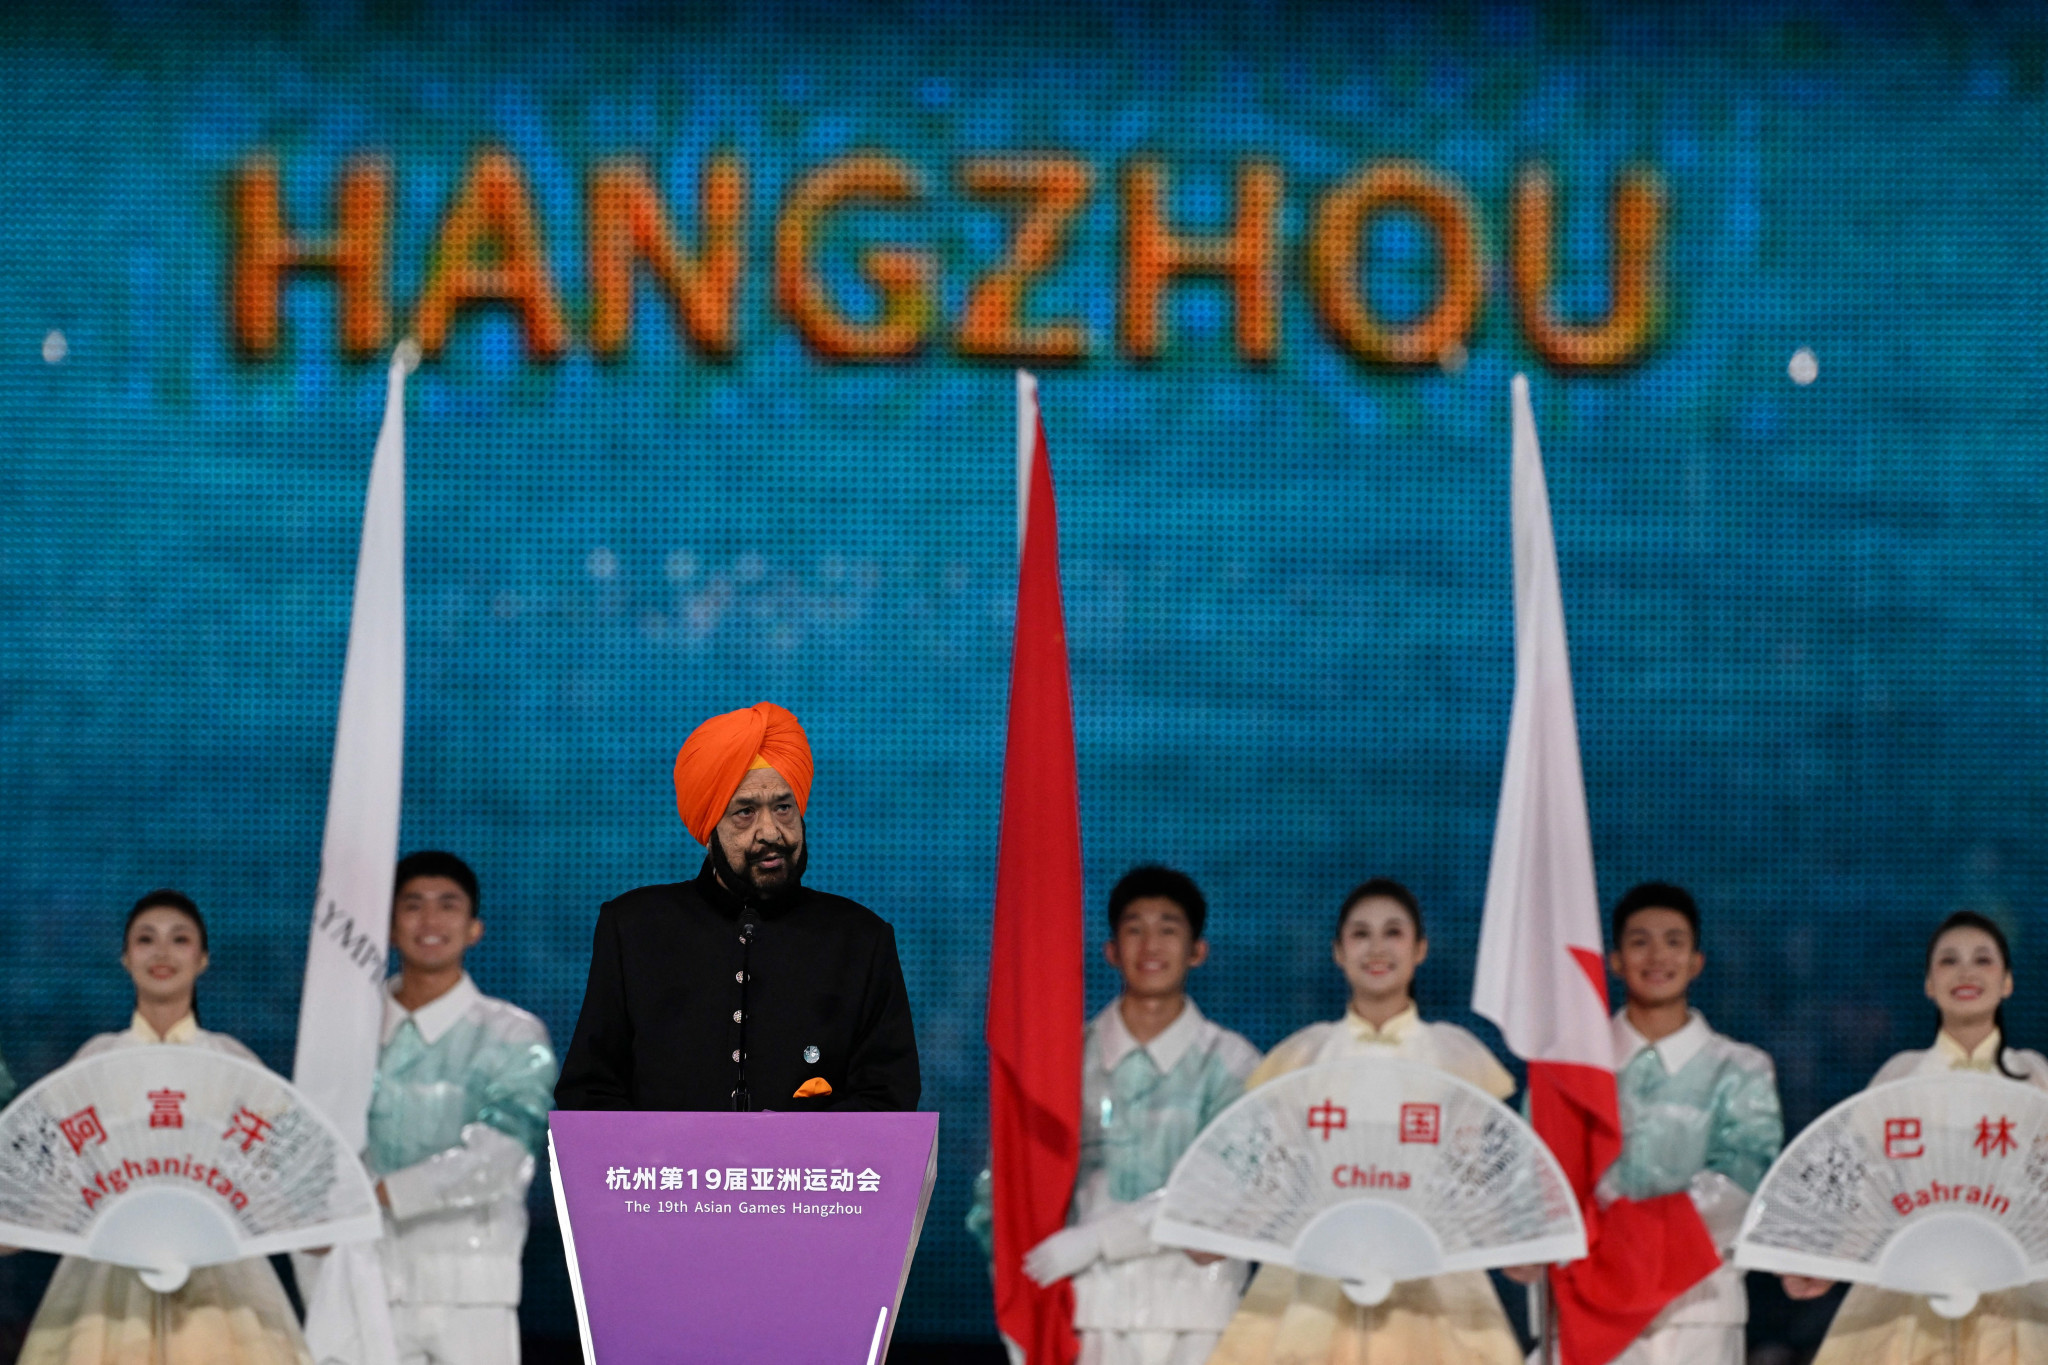 OCA Acting President Randhir Singh has been warned by WADA that his organisation could face compliance proceedings over its decision to allow North Korea's flag to be on show at the Asian Games ©Getty Images